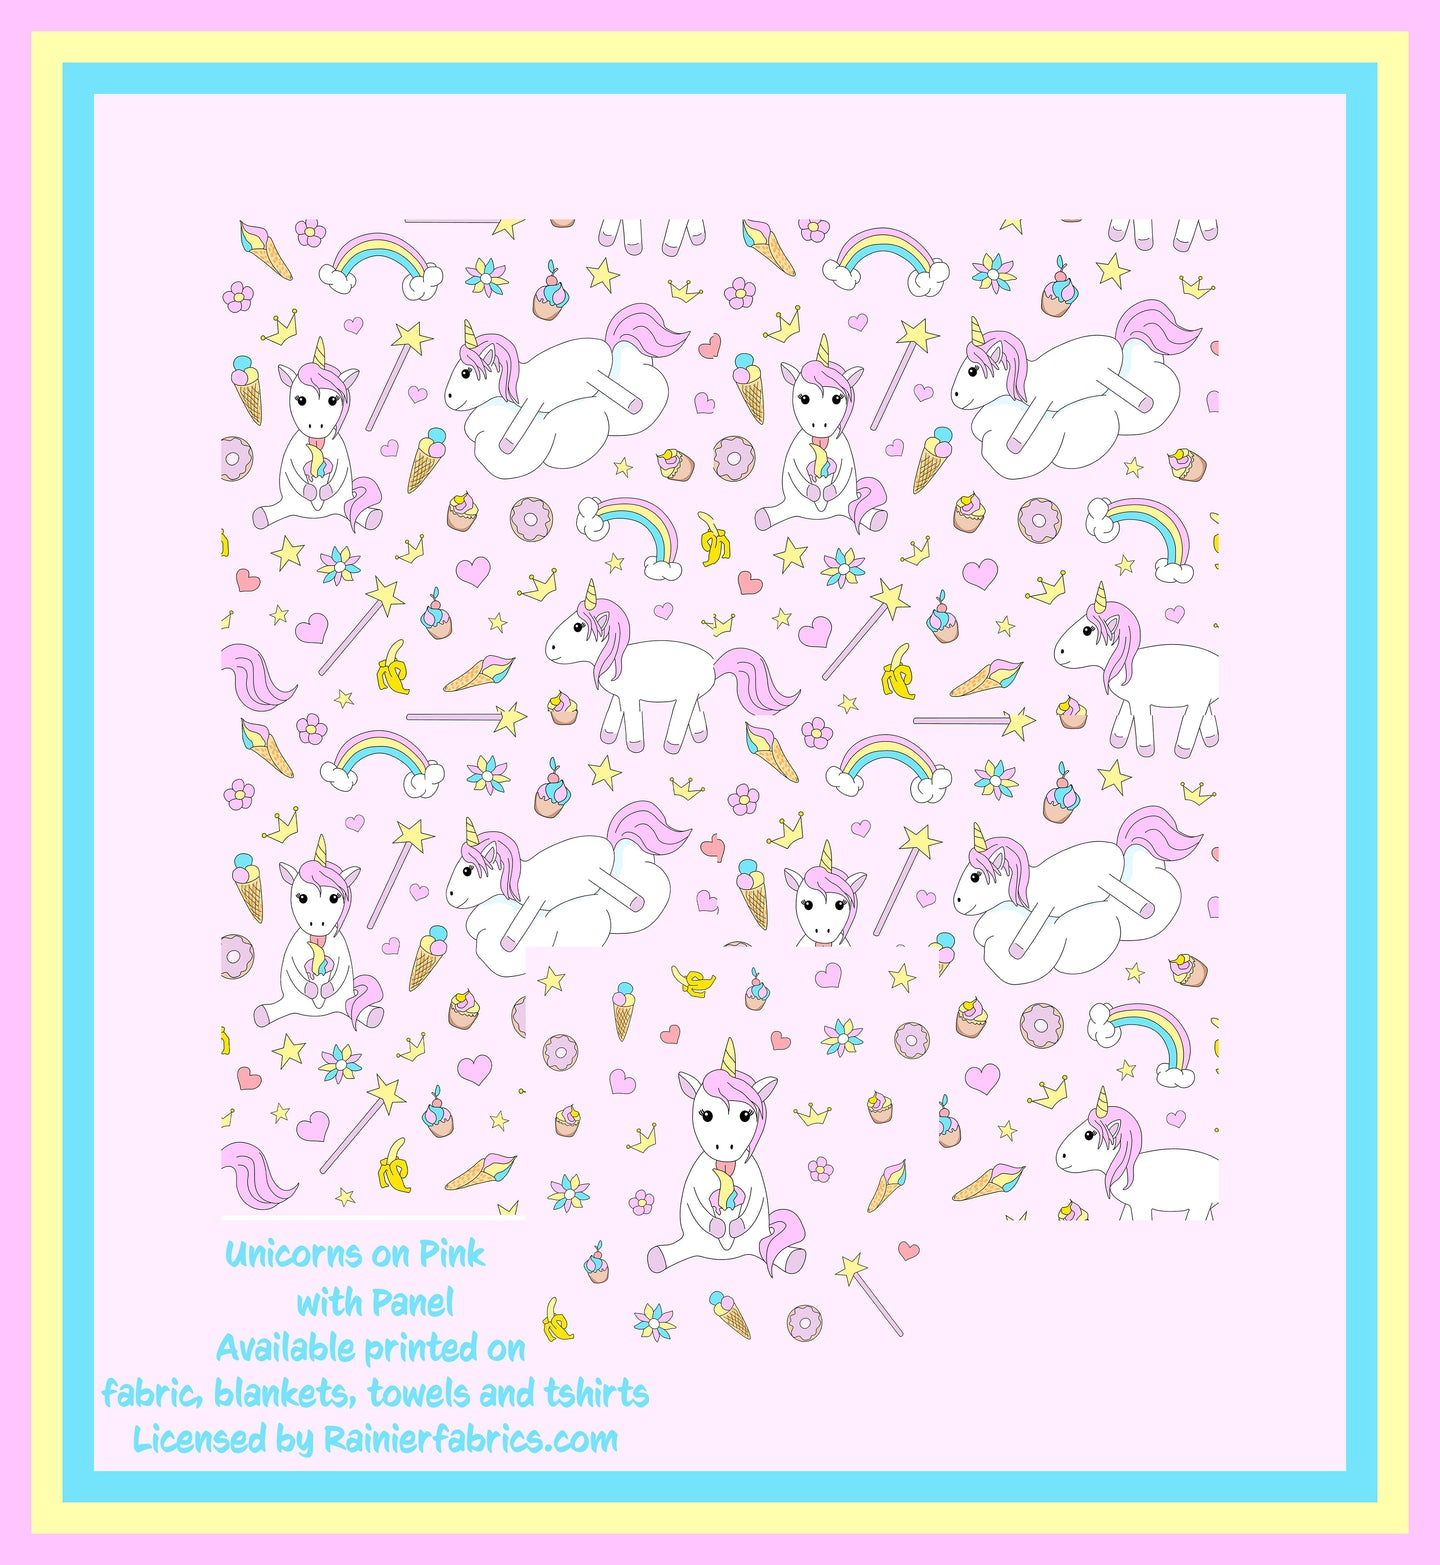 Unicorns on pink with panel - 2-5 day turnaround - Order by 1/2 yard; Description of bases below